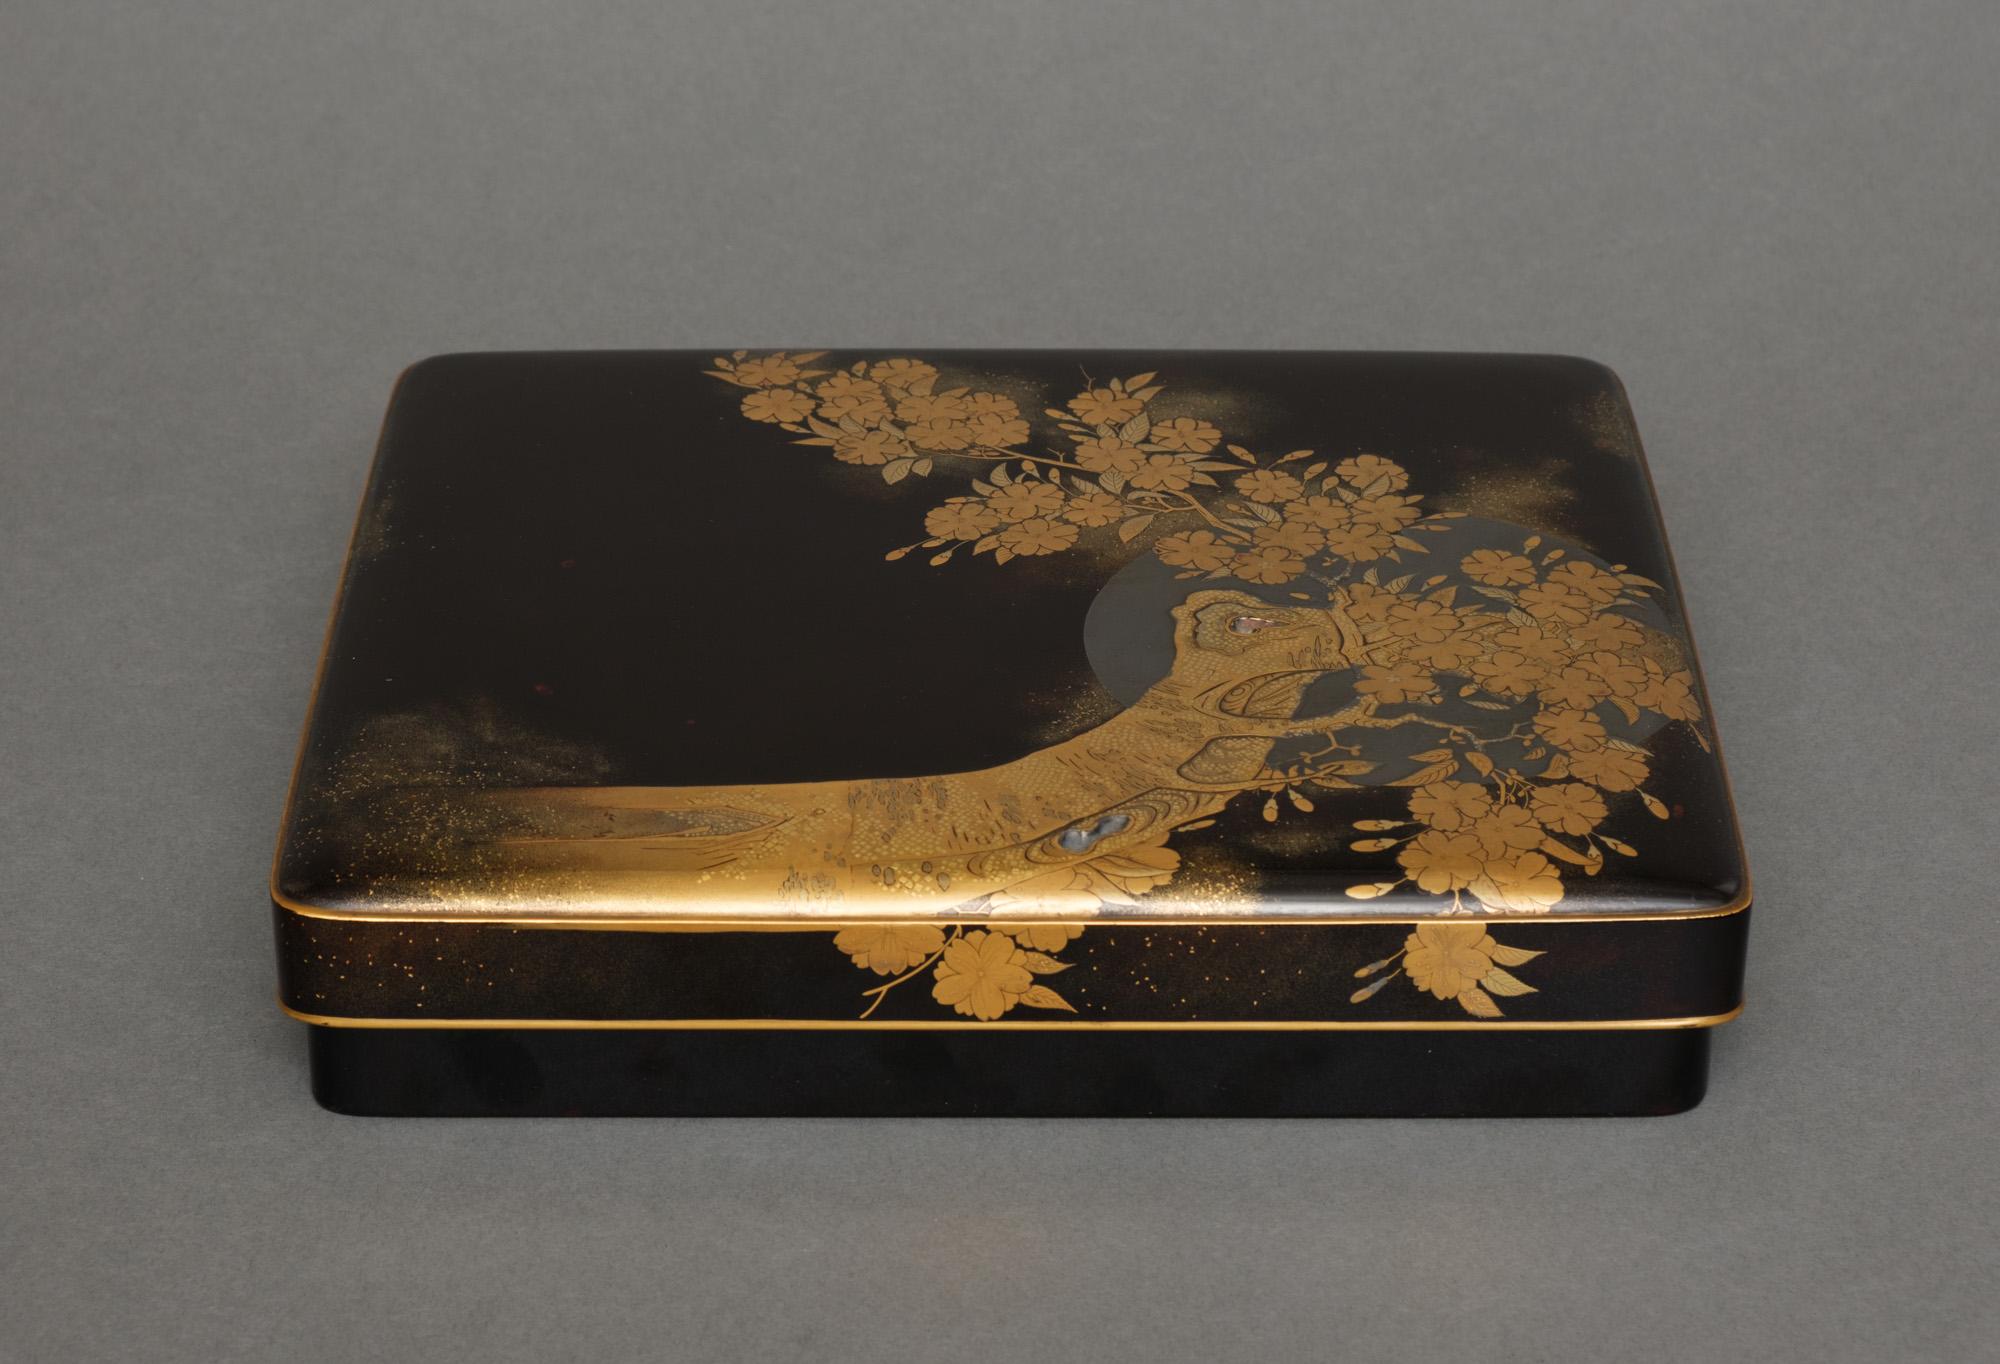 19th Century Japanese lacquer suzuri’bako 箱 with a cherry blossom & Chinese landscape design